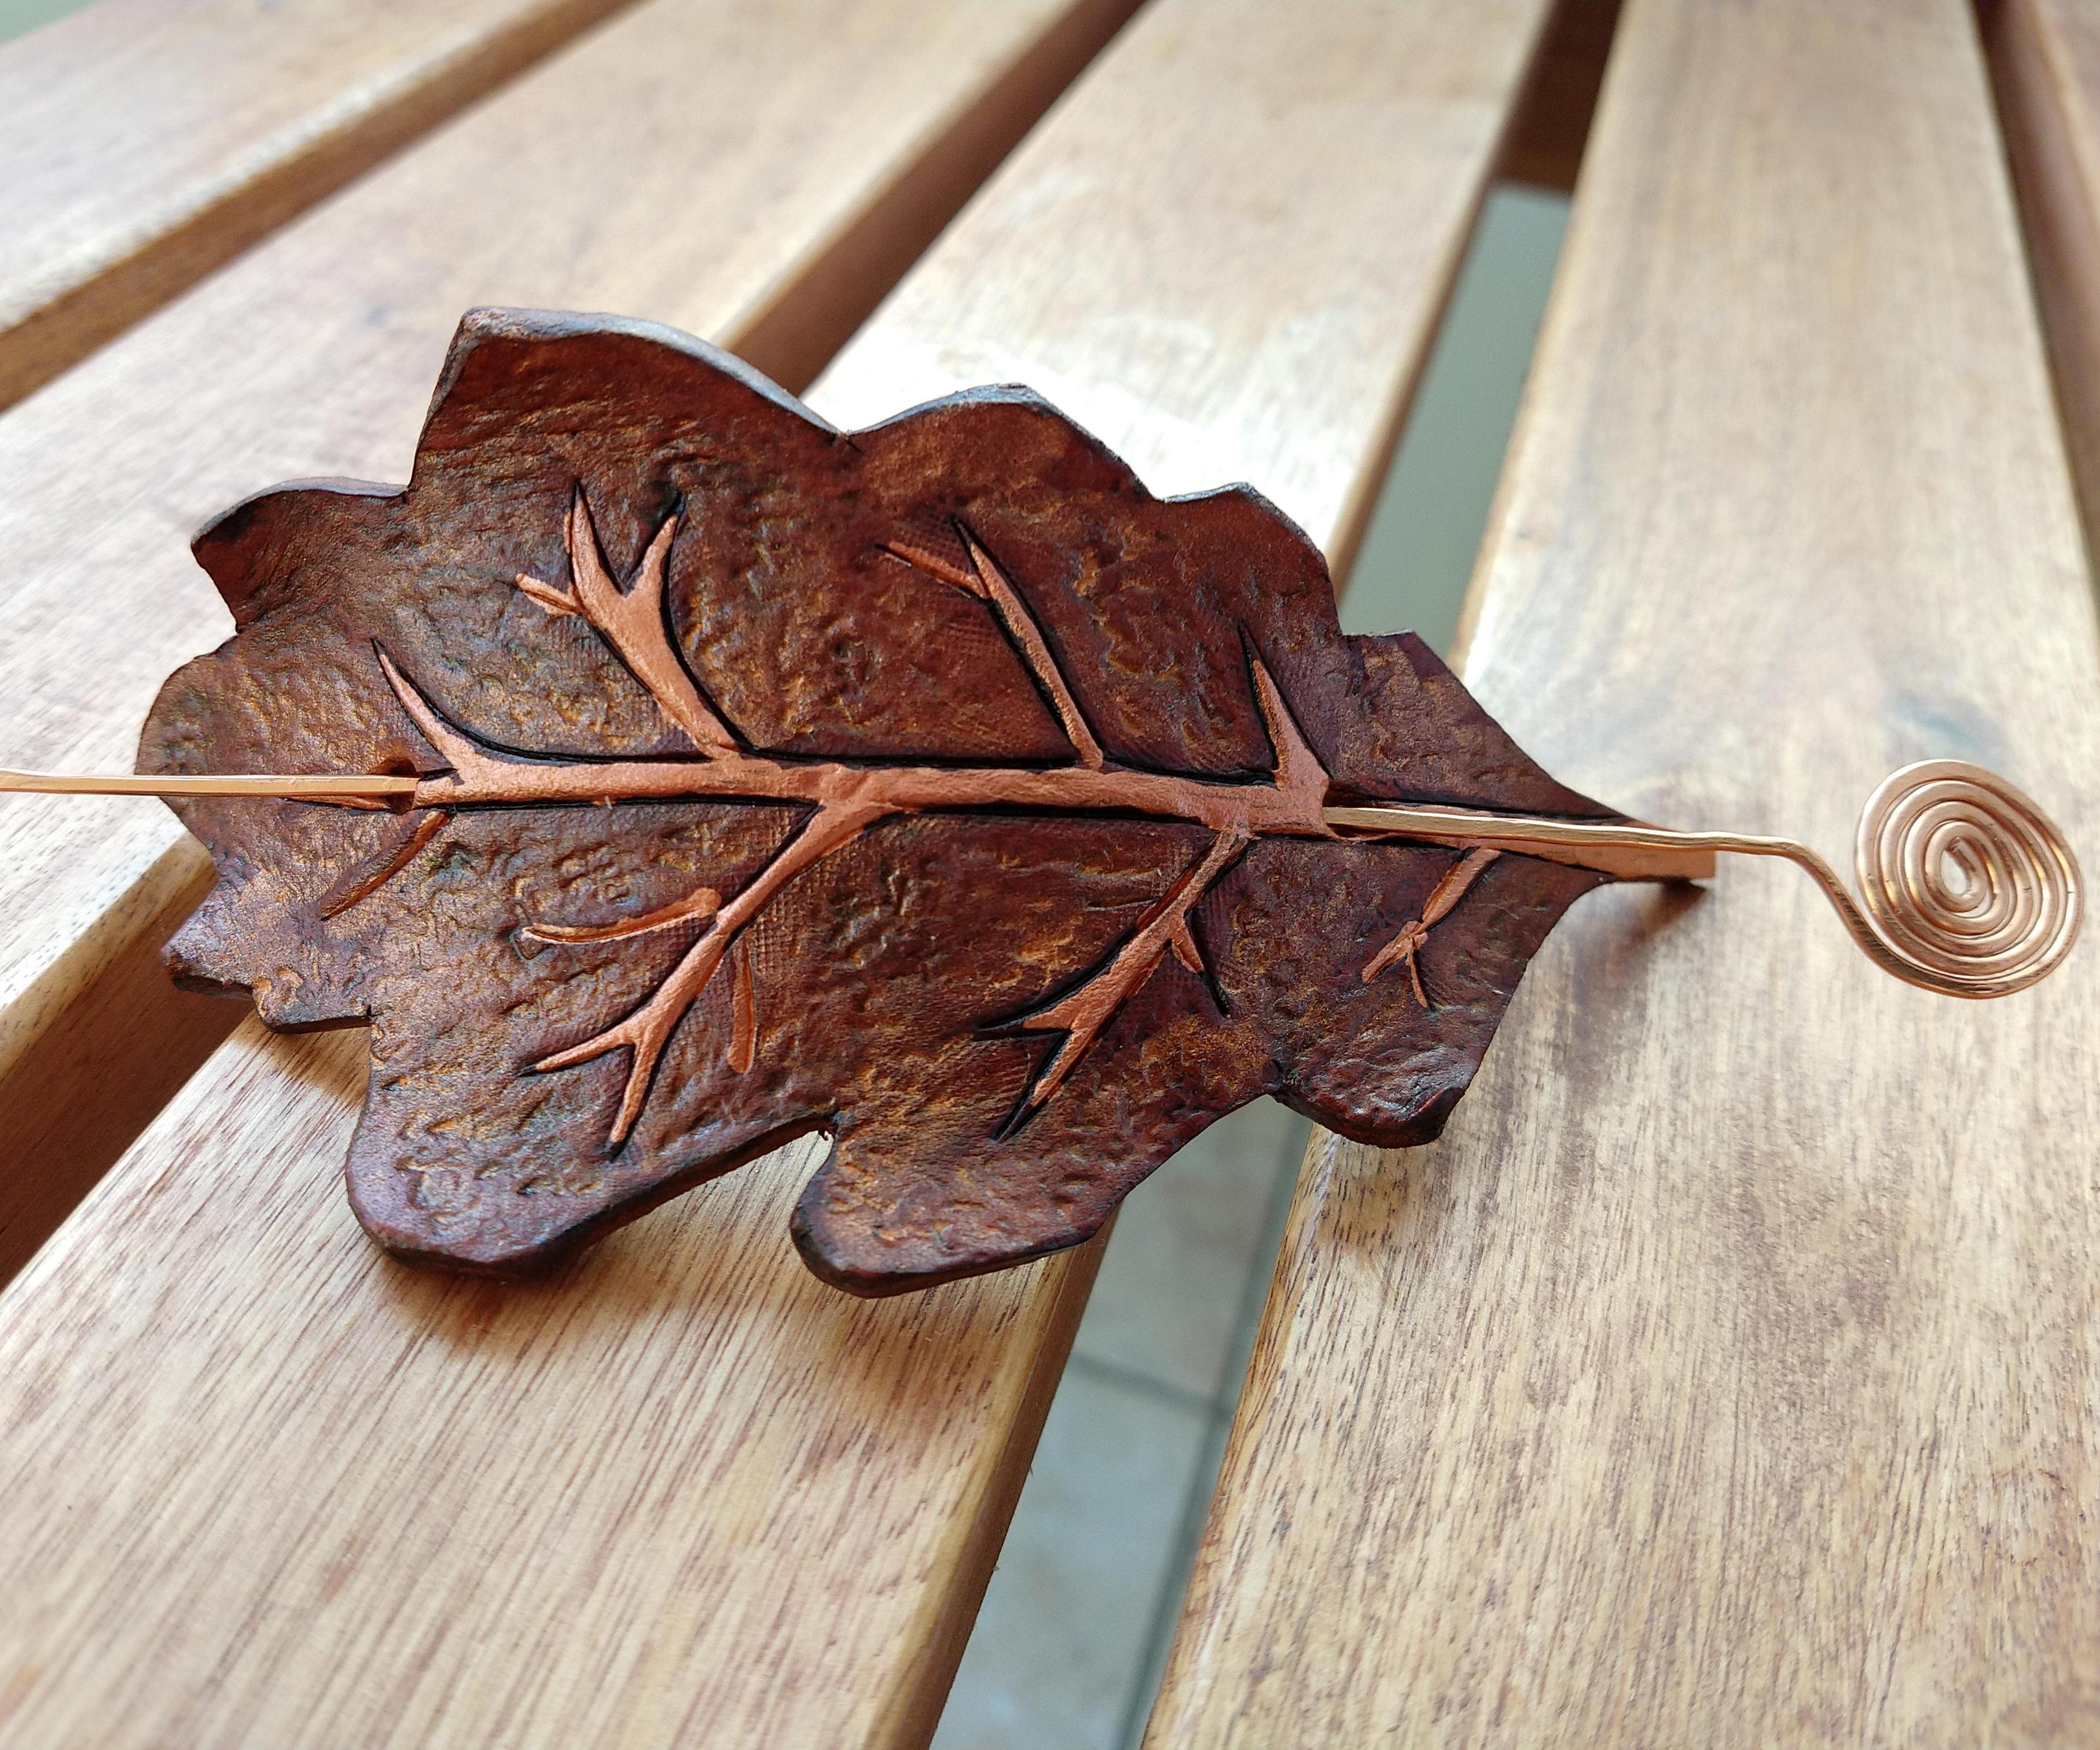 Oak Leaf Barrette From Scrap Leather and Copper Wire